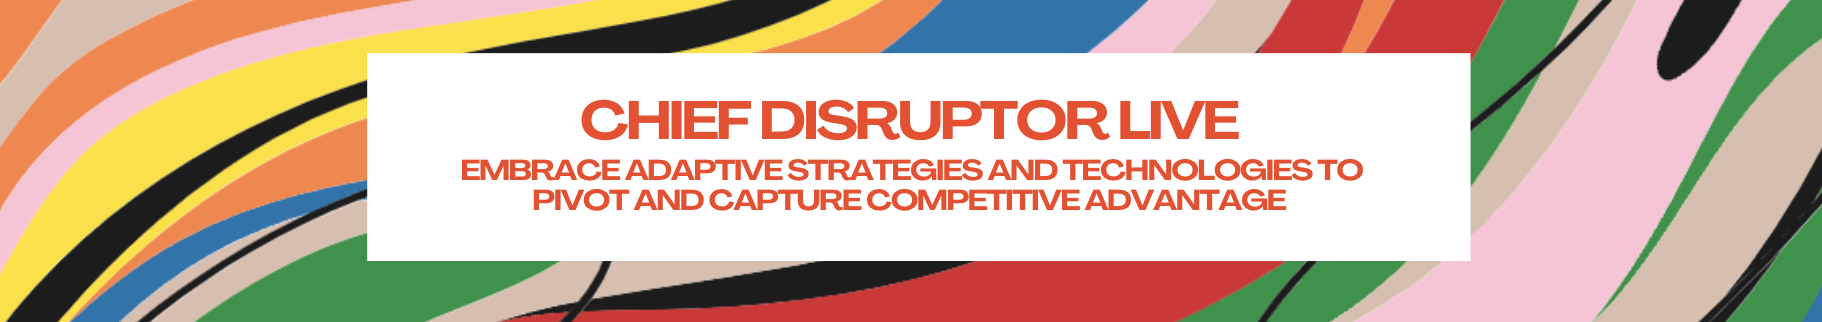 Chief Disruptor LIVE: Embrace adaptive strategies and technologies to pivot and capture competitive advantage